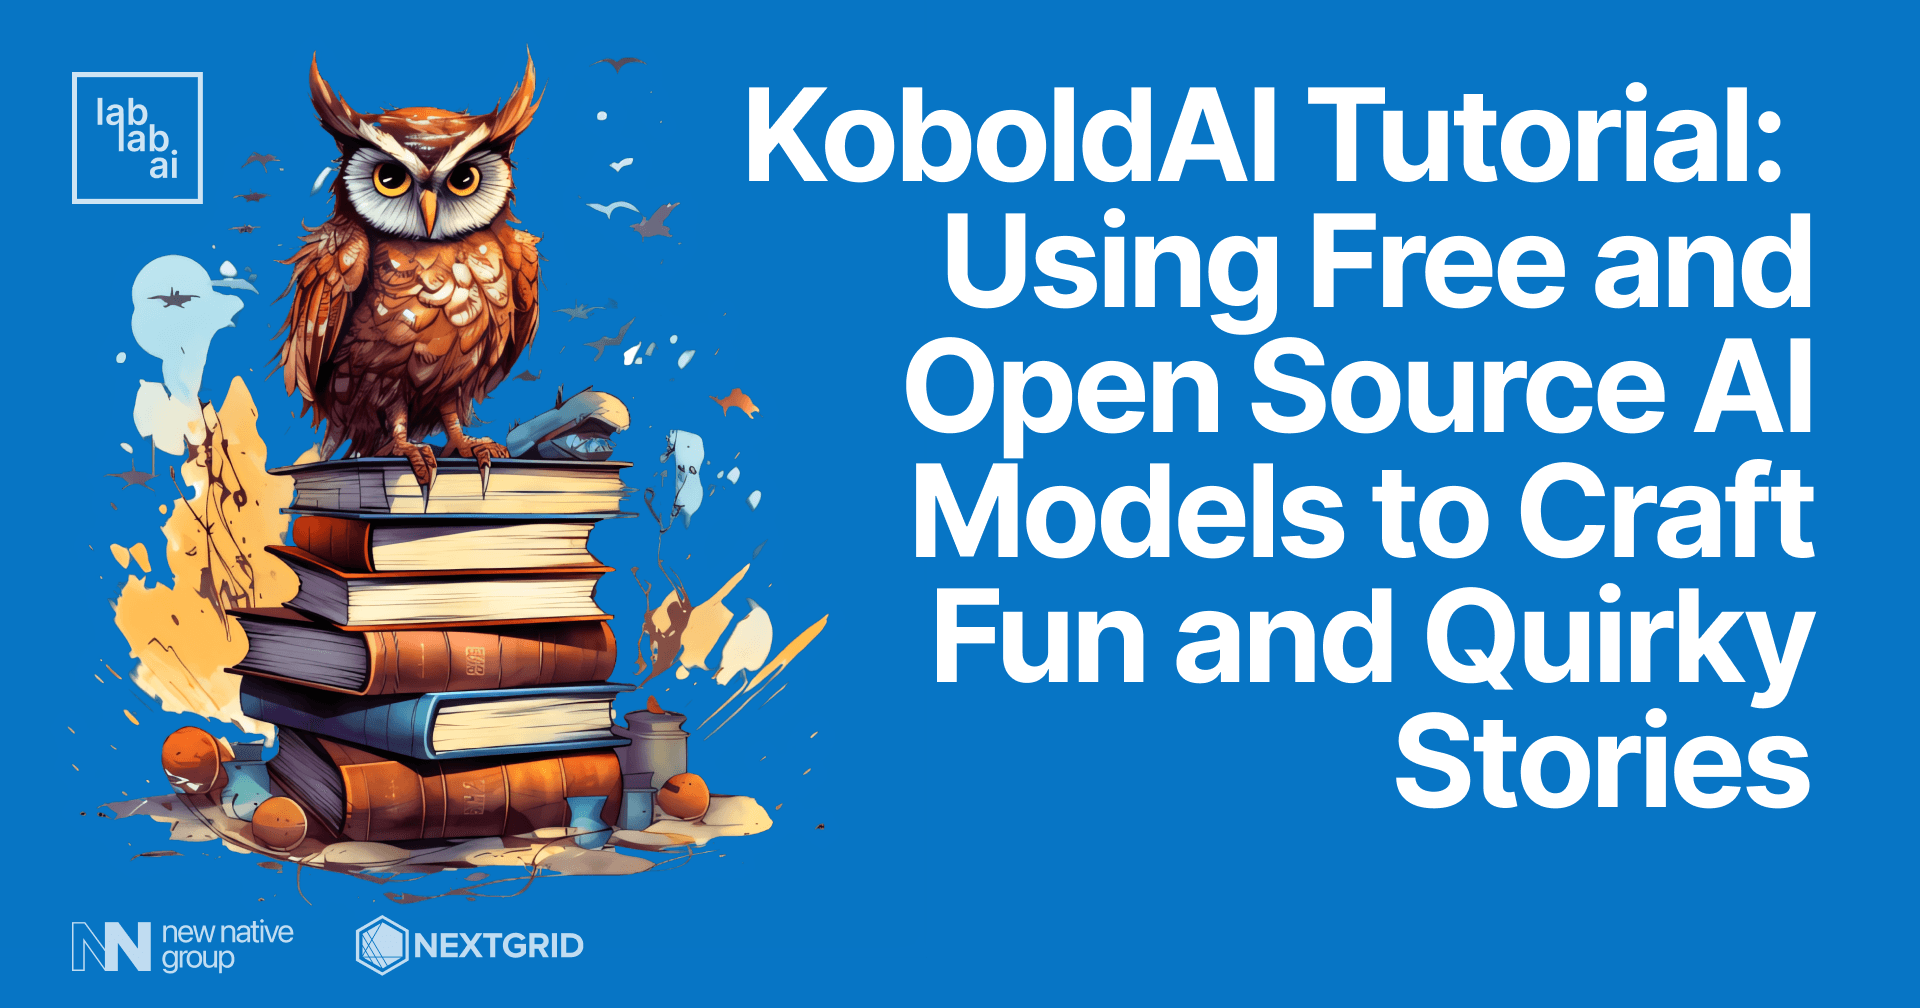 KoboldAI Tutorial: Using Free and Open Source AI Models to Craft Fun and Quirky Stories